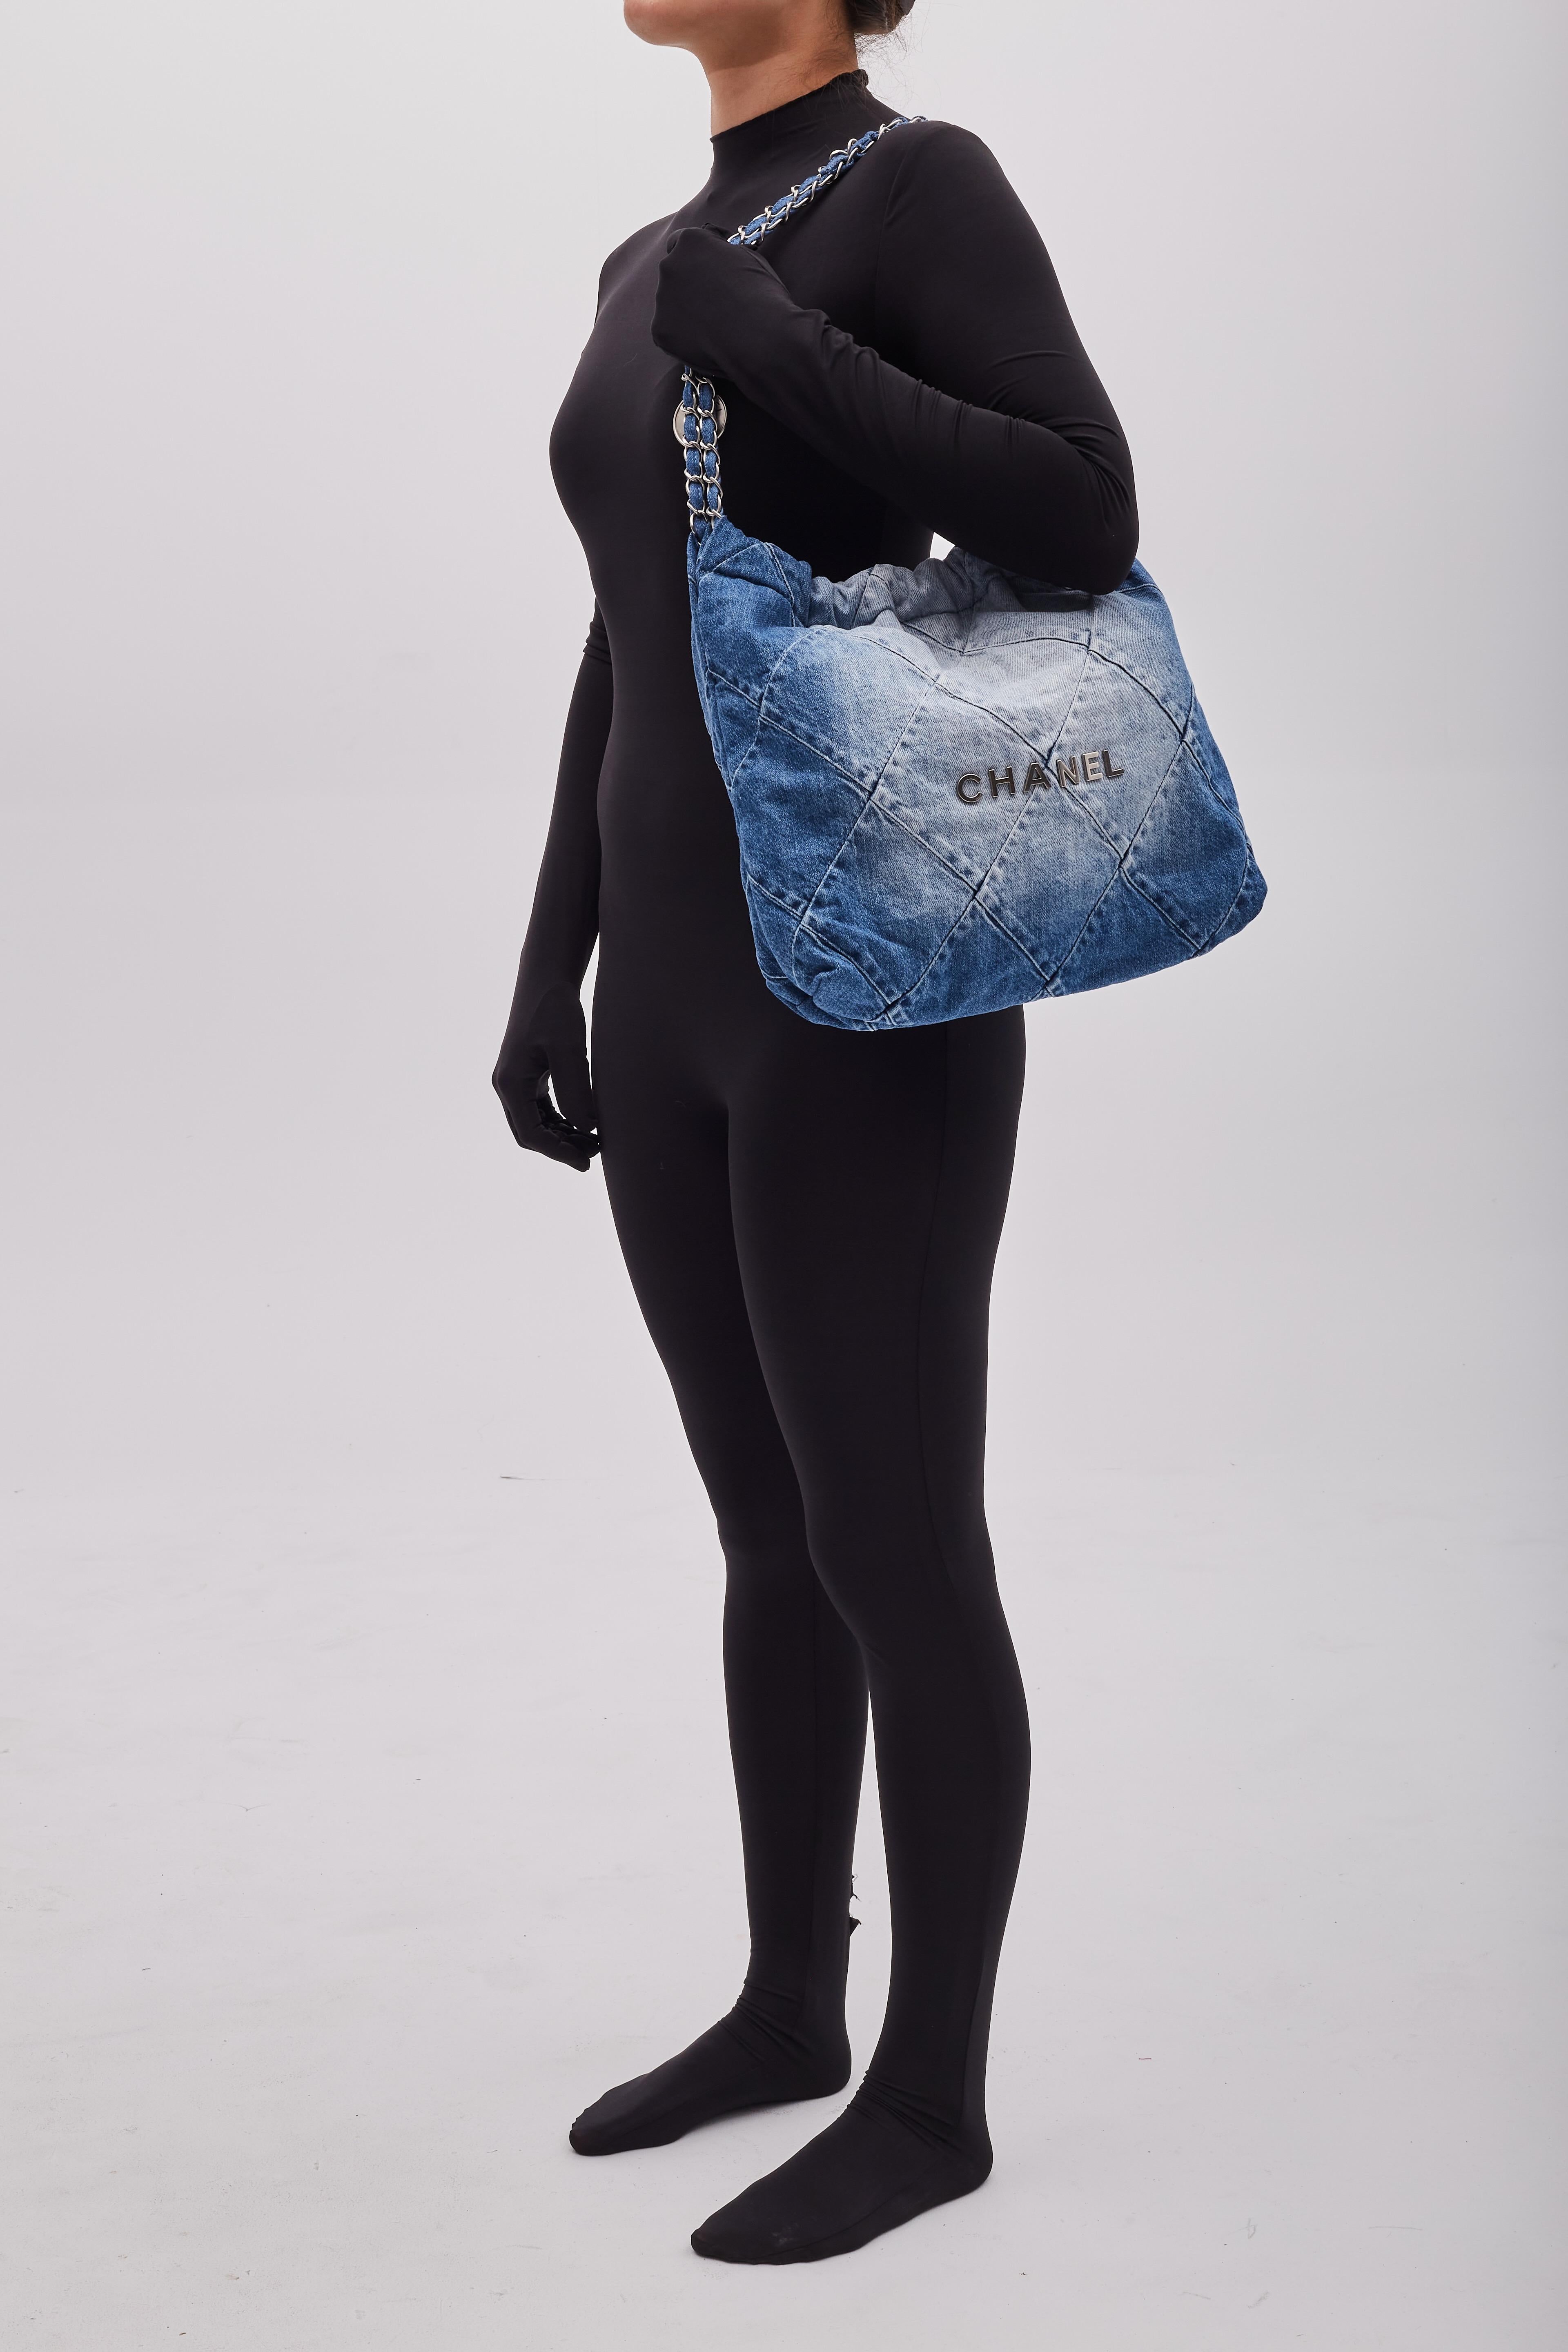 This bag is made of diamond-stitched blue denim with silver tone hardware. The bag features denim threaded chain shoulder straps, a matching Chanel logo on the front and a hanging logo charm. The drawstring shoulder straps and magnetic snap closure